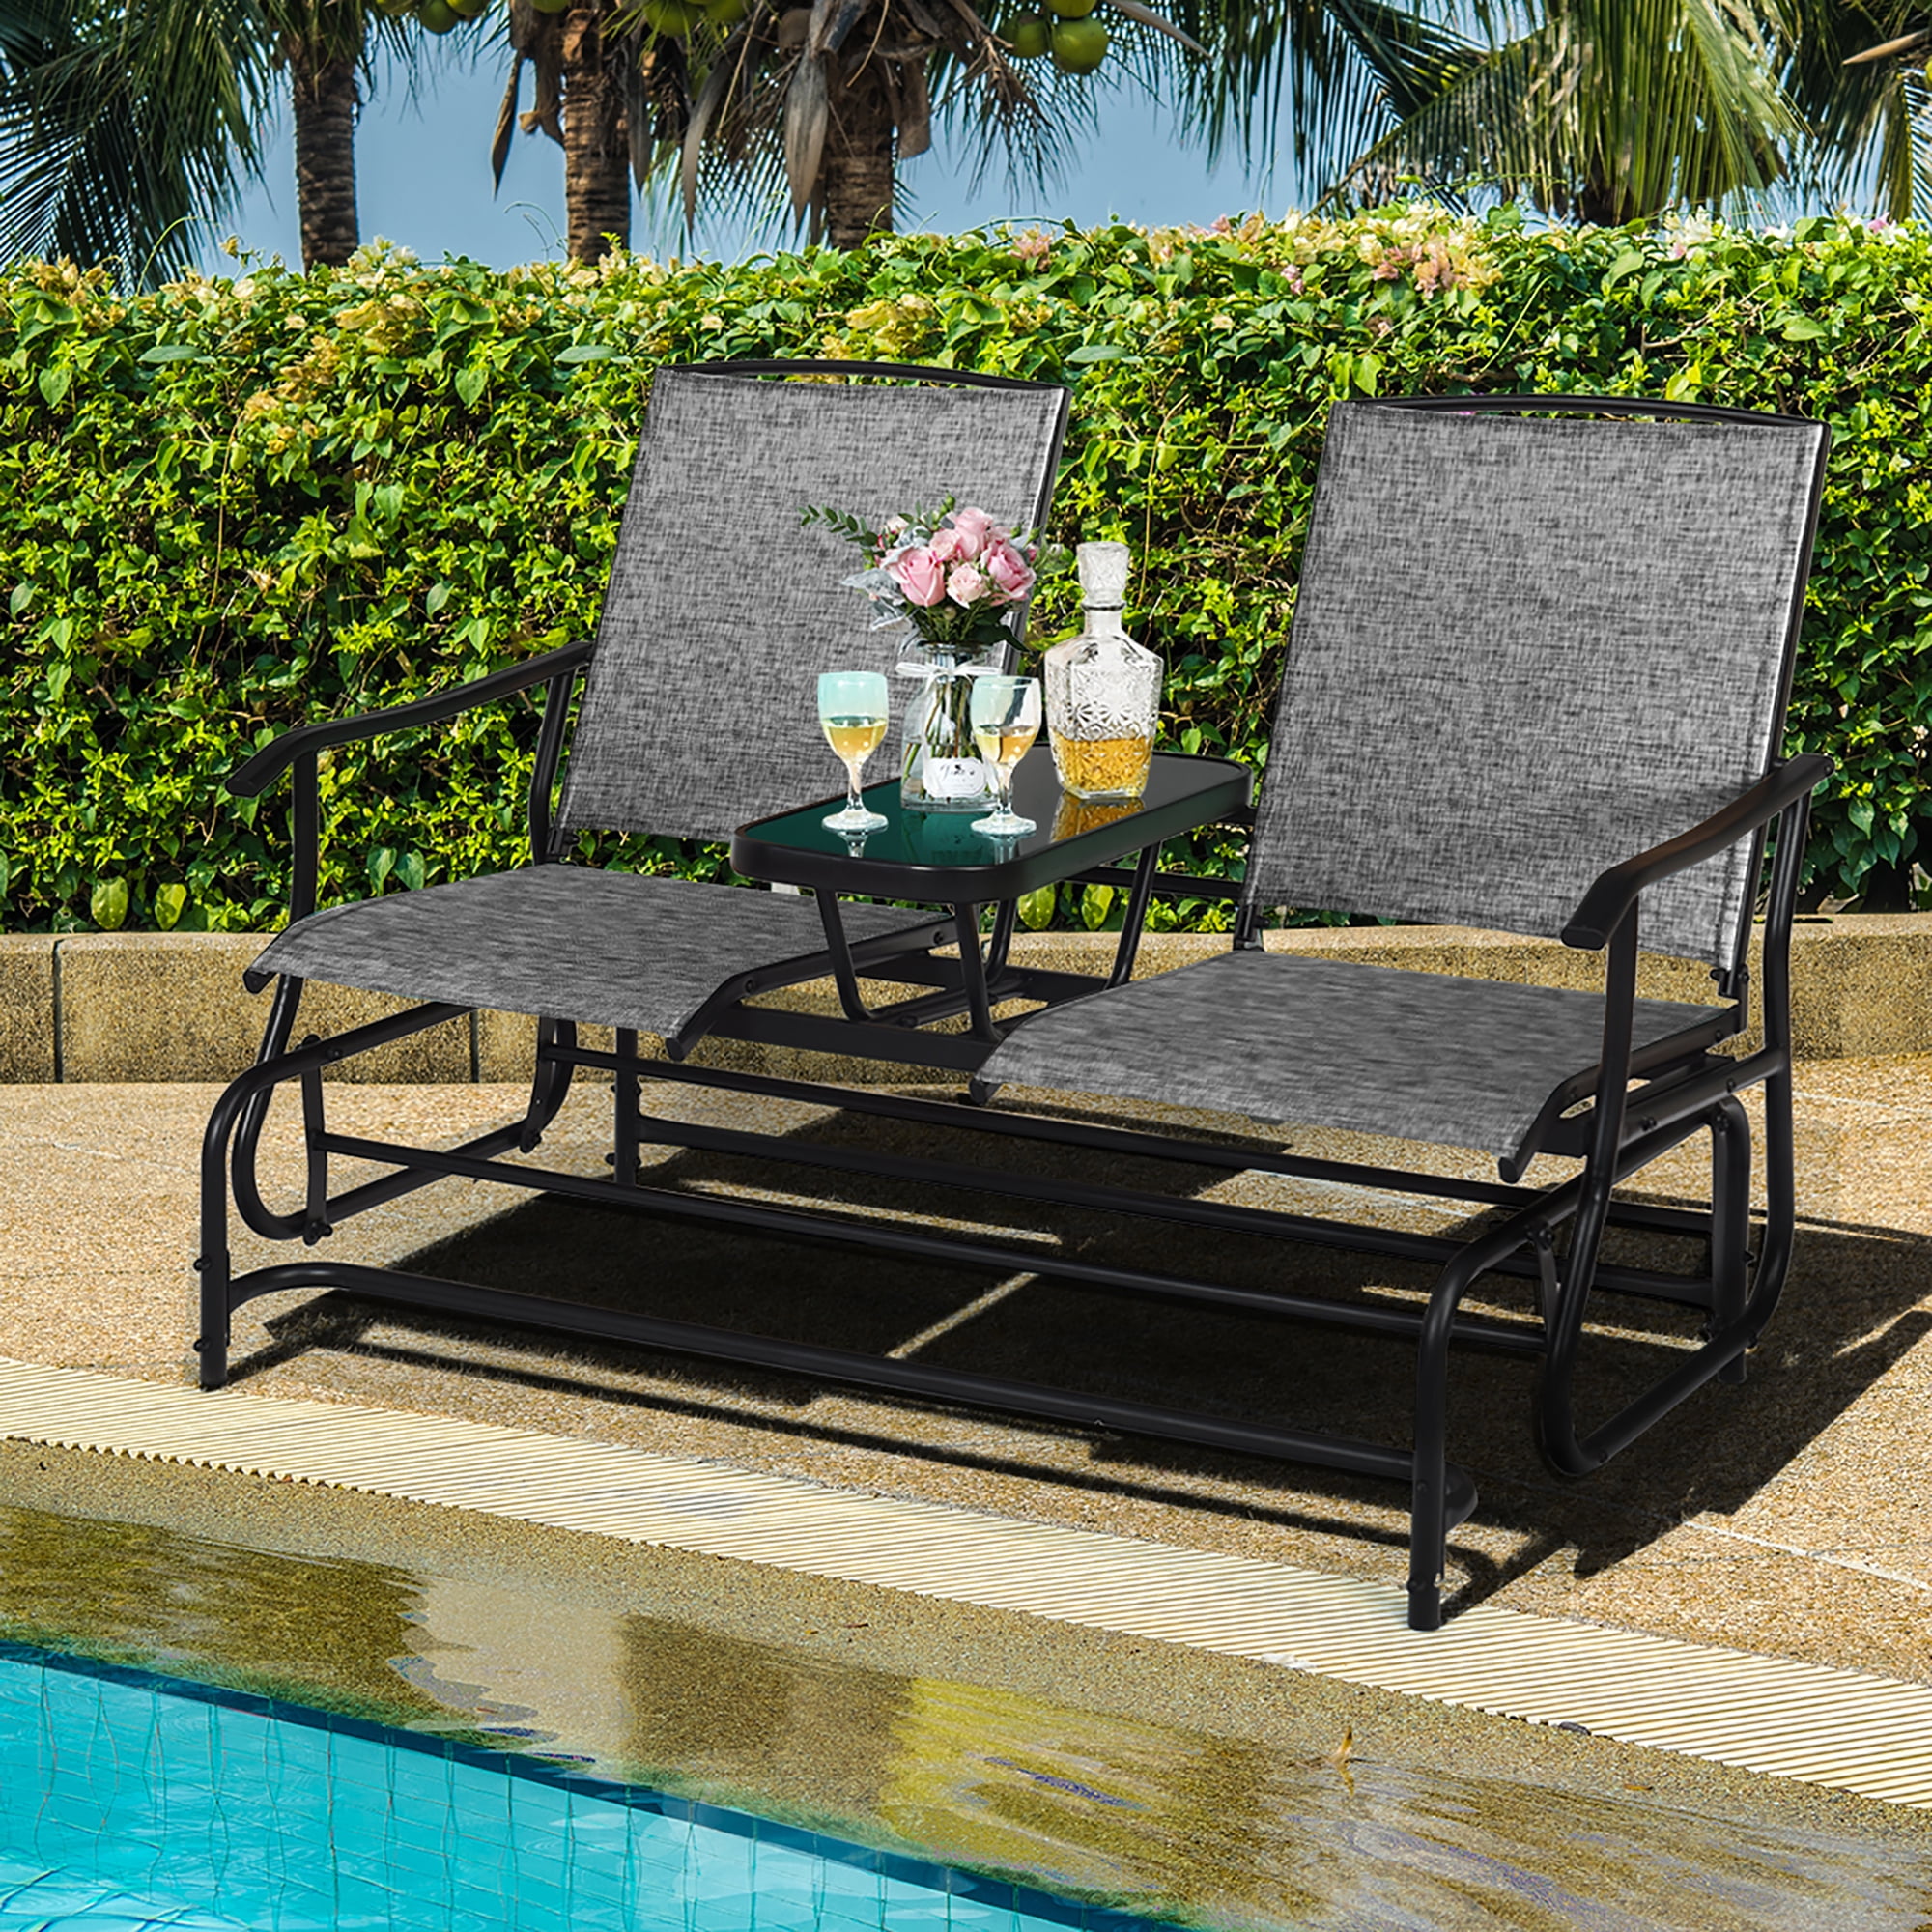 Details about   2 Person Outdoor Patio Double Glider Chair Loveseat Rocking with Center Table 